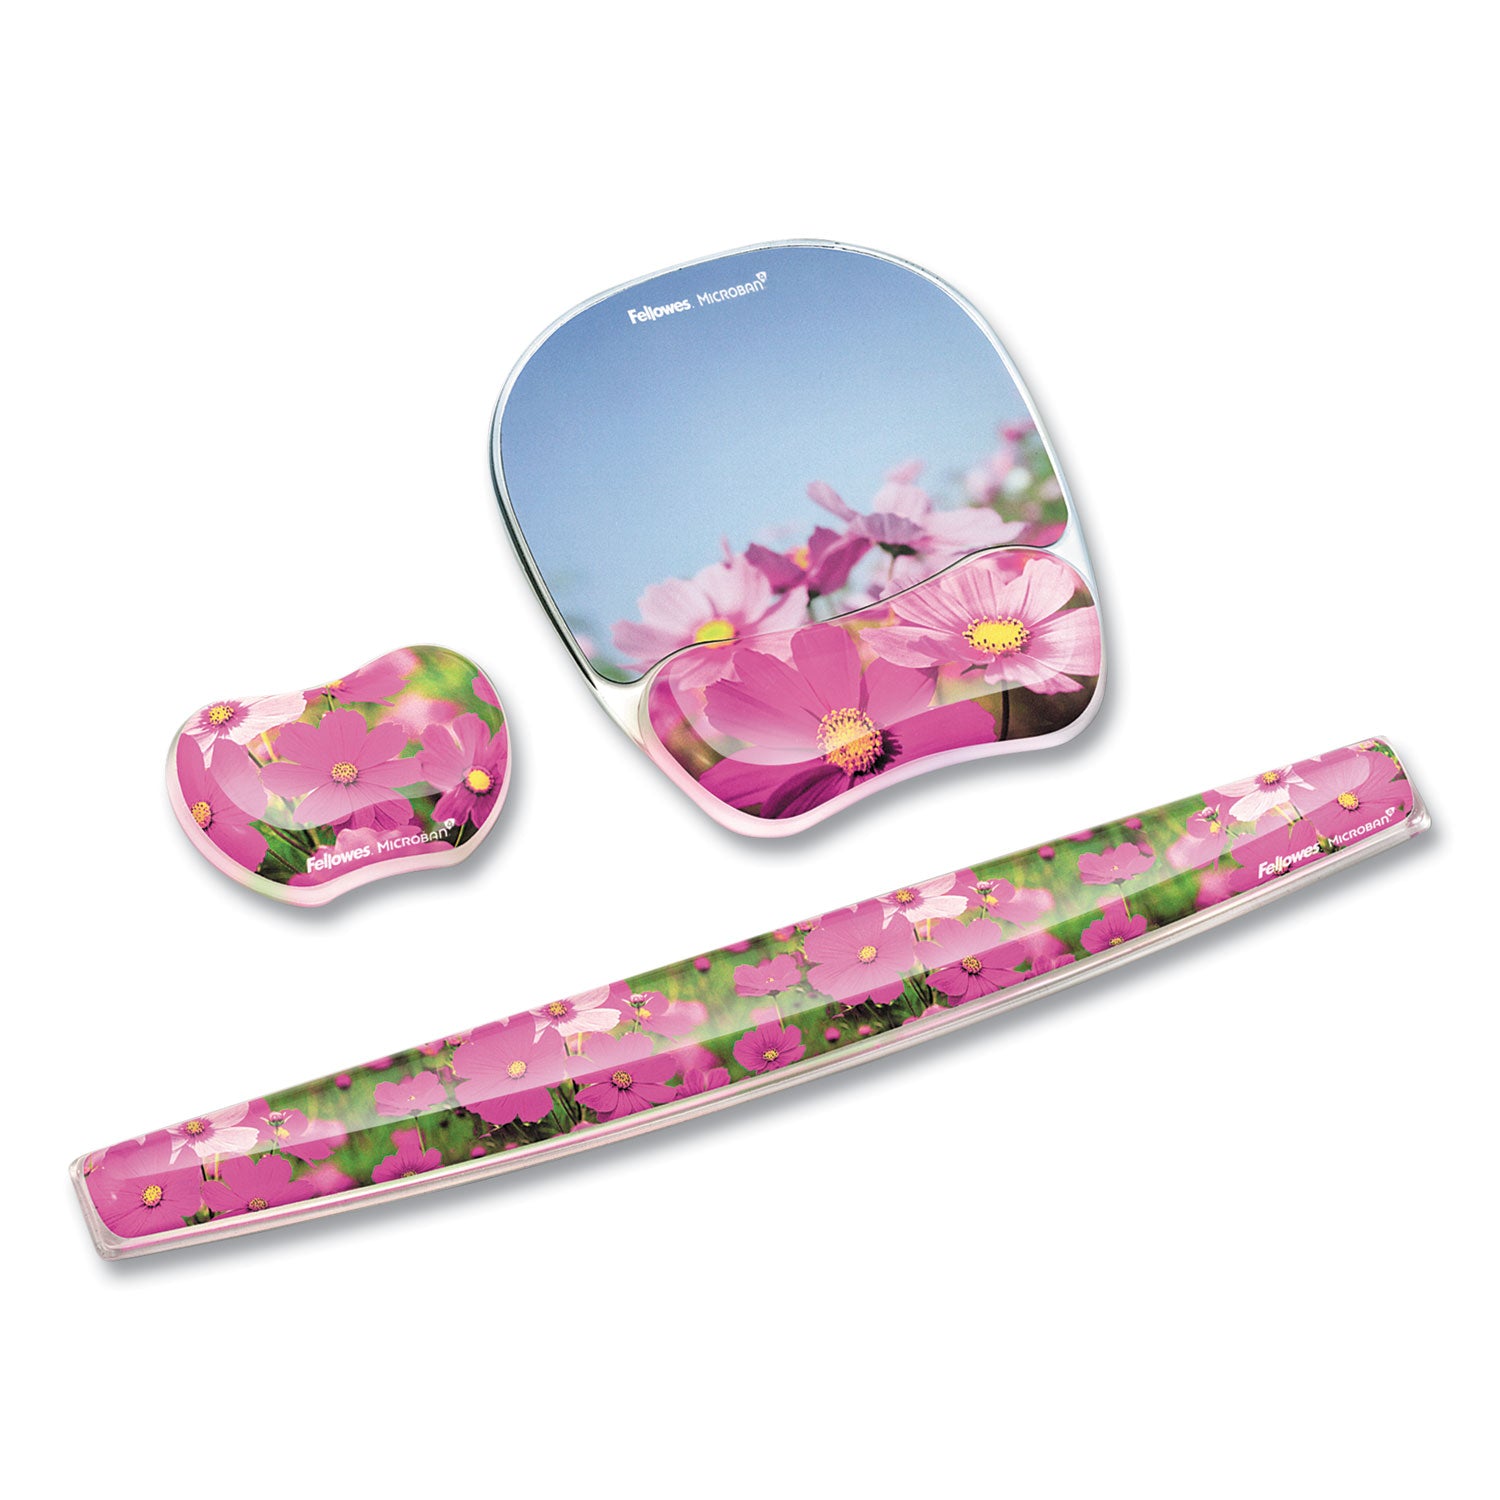 Photo Gel Mouse Pad with Wrist Rest with Microban Protection, 9.25 x 7.87, Pink Flowers Design - 